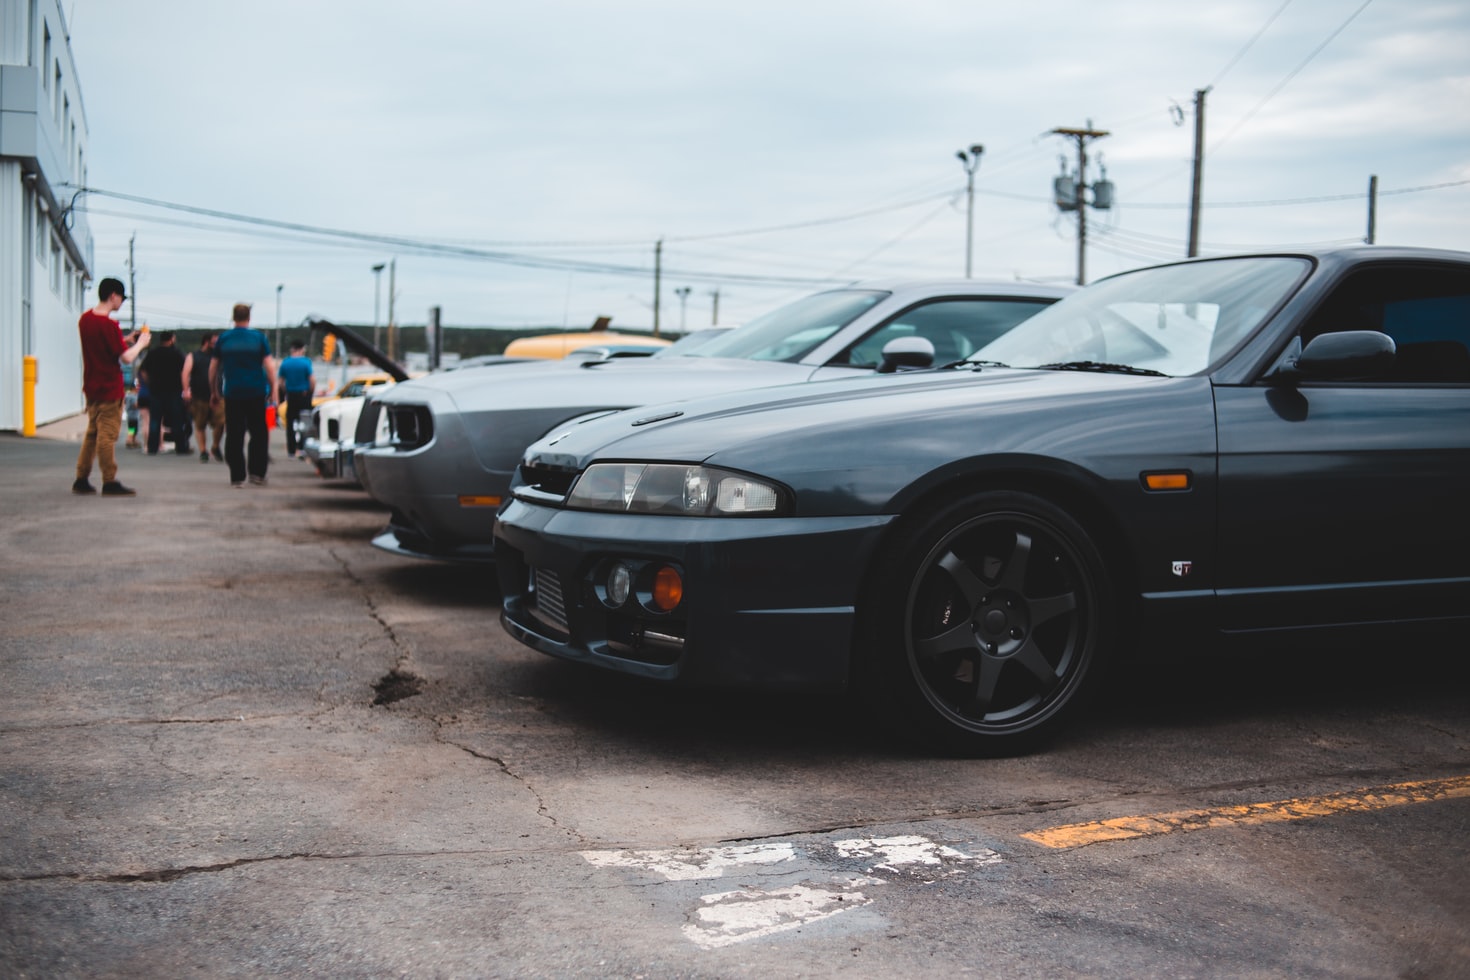 Advantages Of Purchasing A Vehicle From A Used Car Dealership